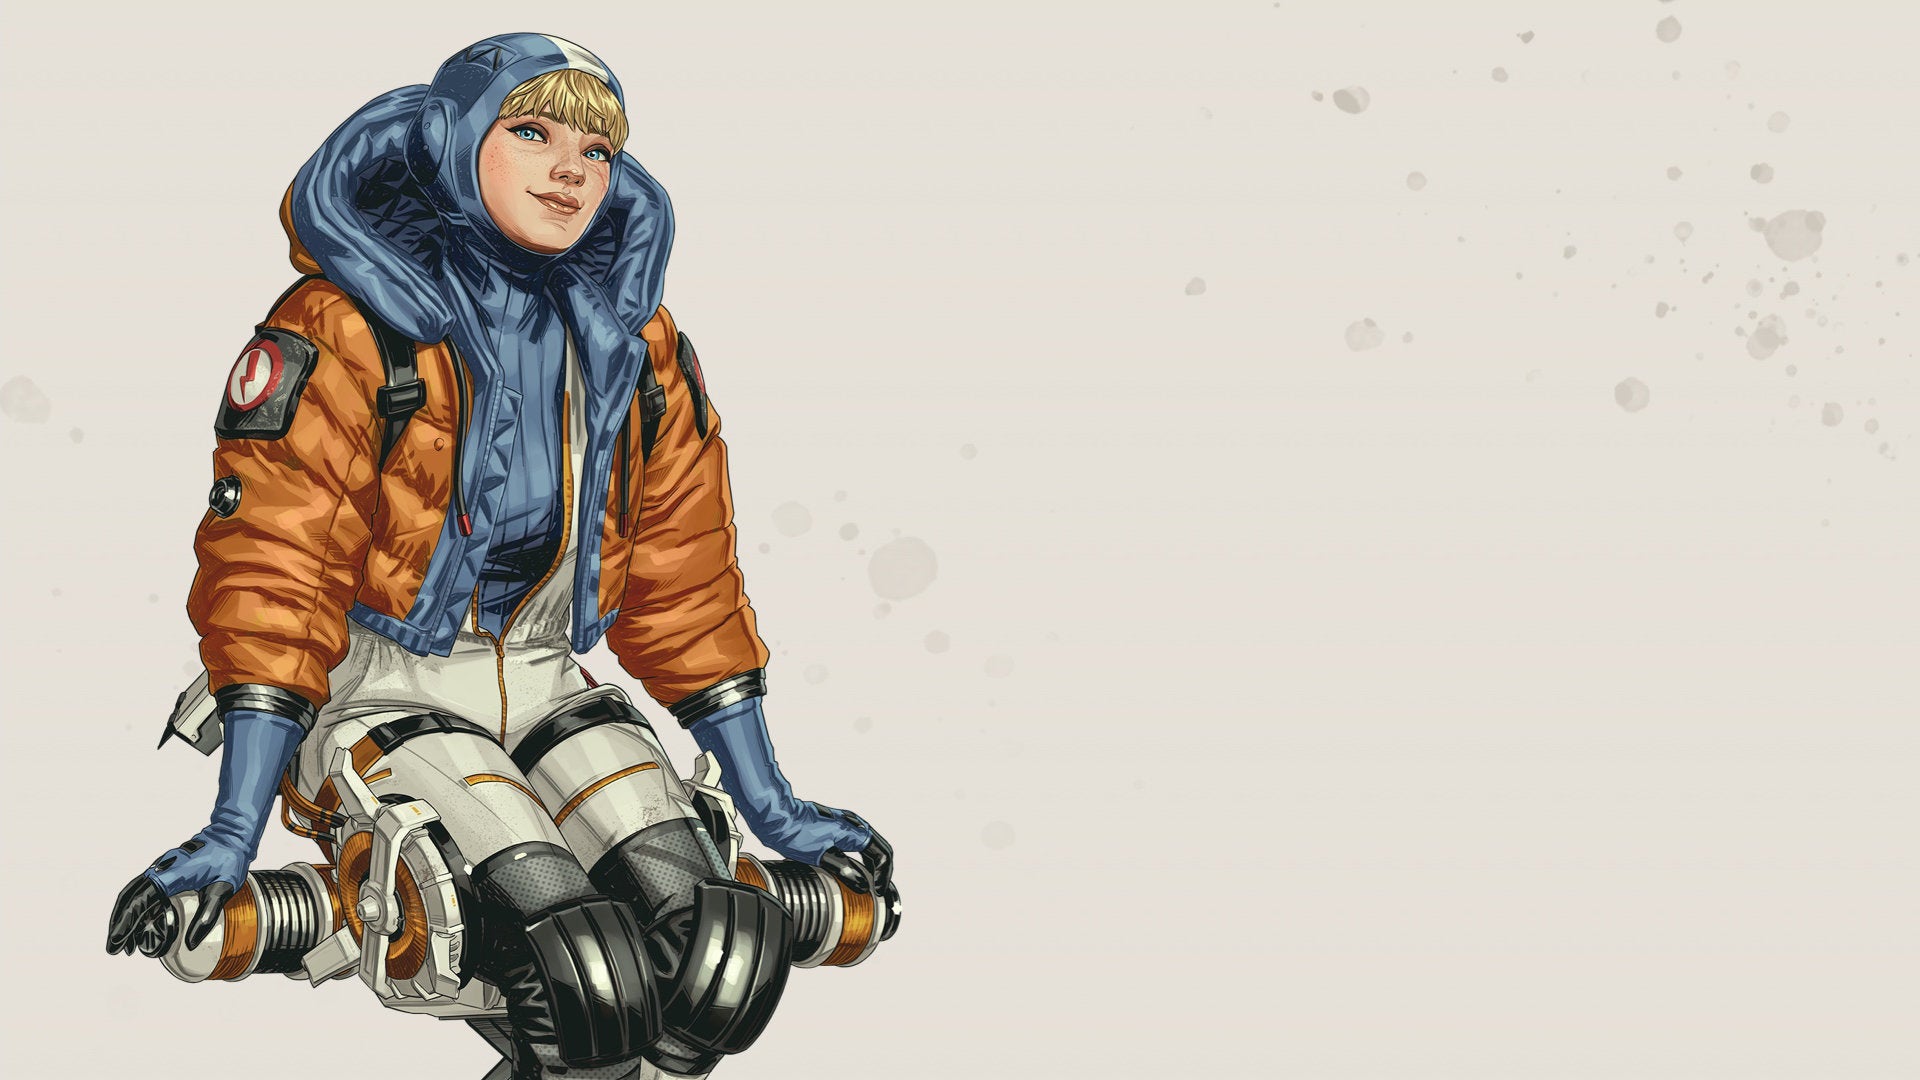 Official art of Wattson, one of the Apex Legends characters.